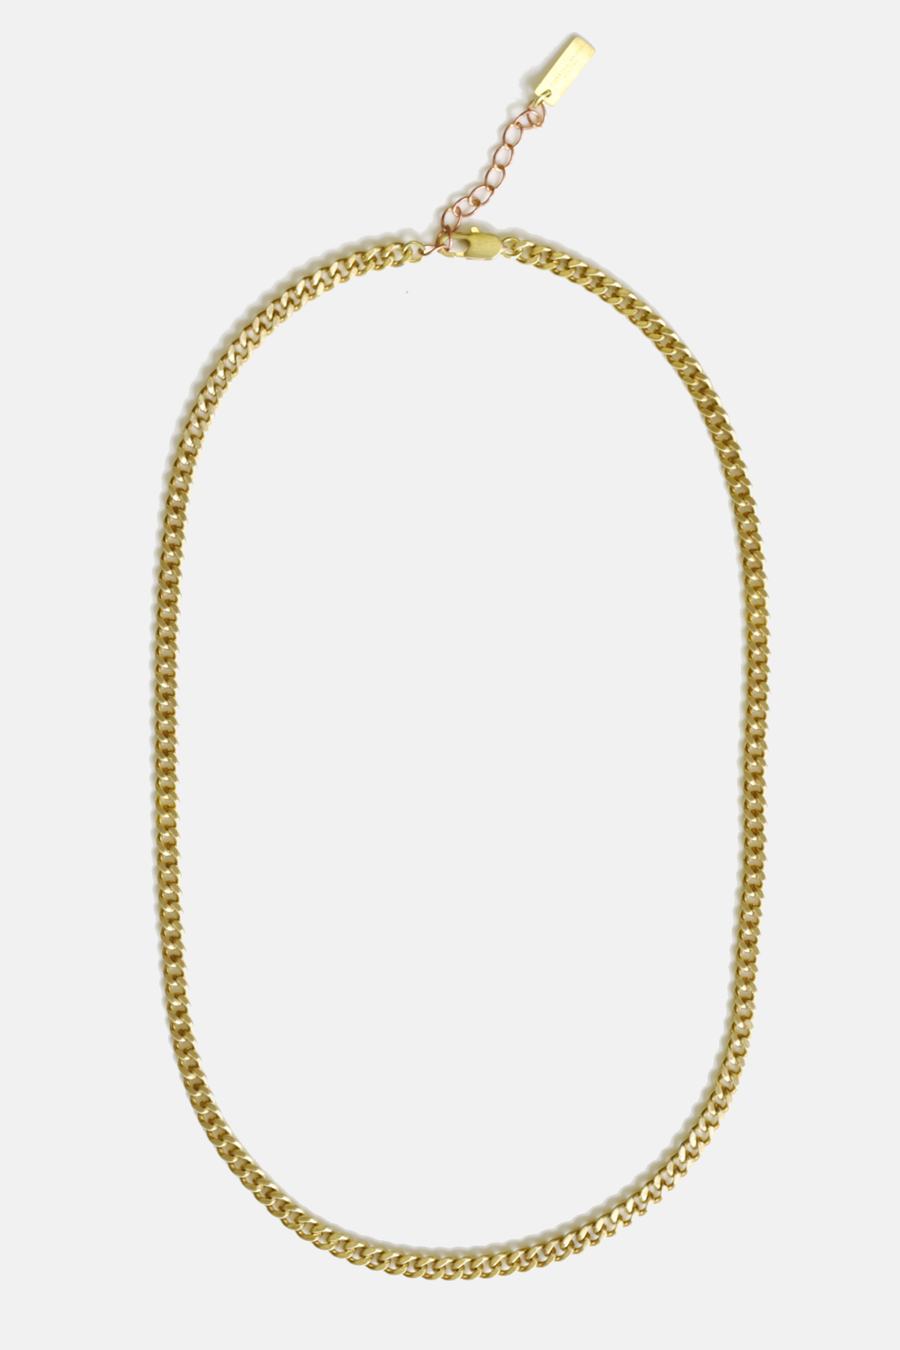 5mm Curb Chain Necklace: Stainless steel